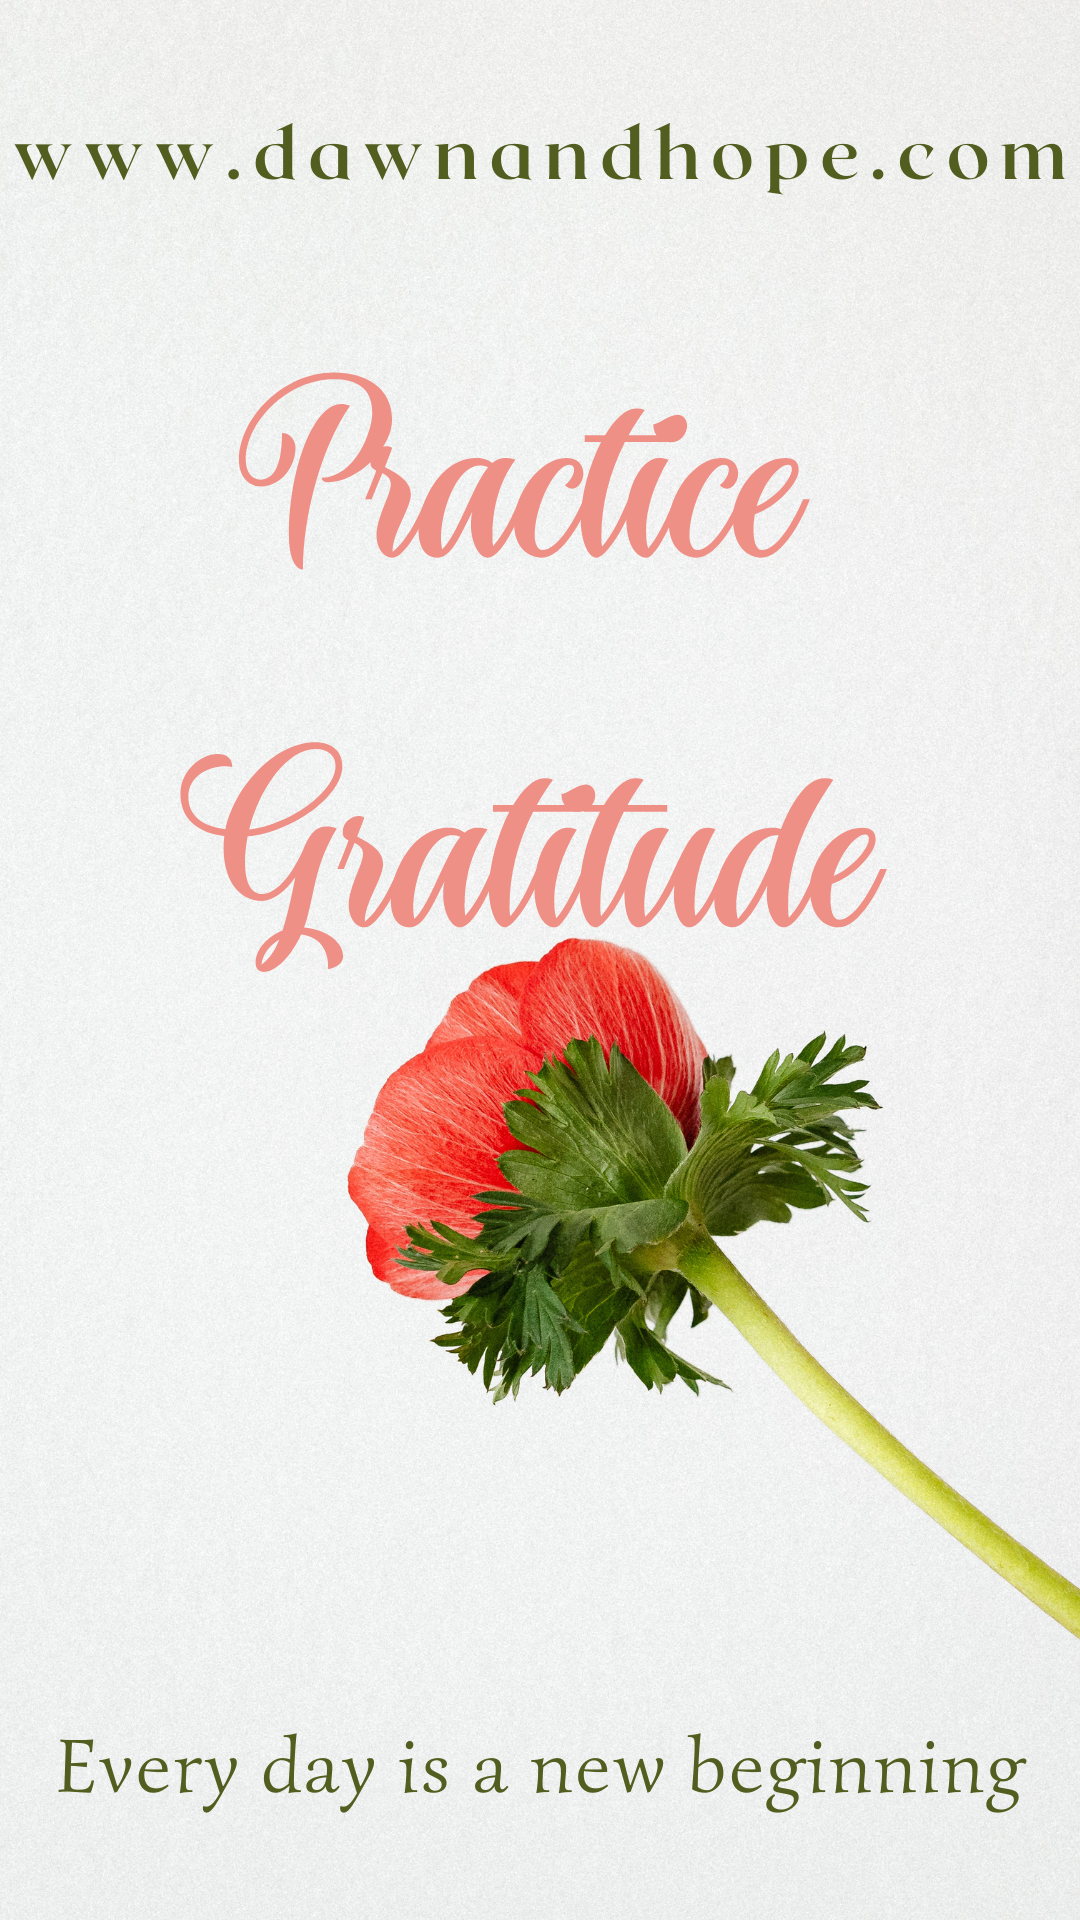 Want to be happy? Practice gratitude. | Dawn and Hope